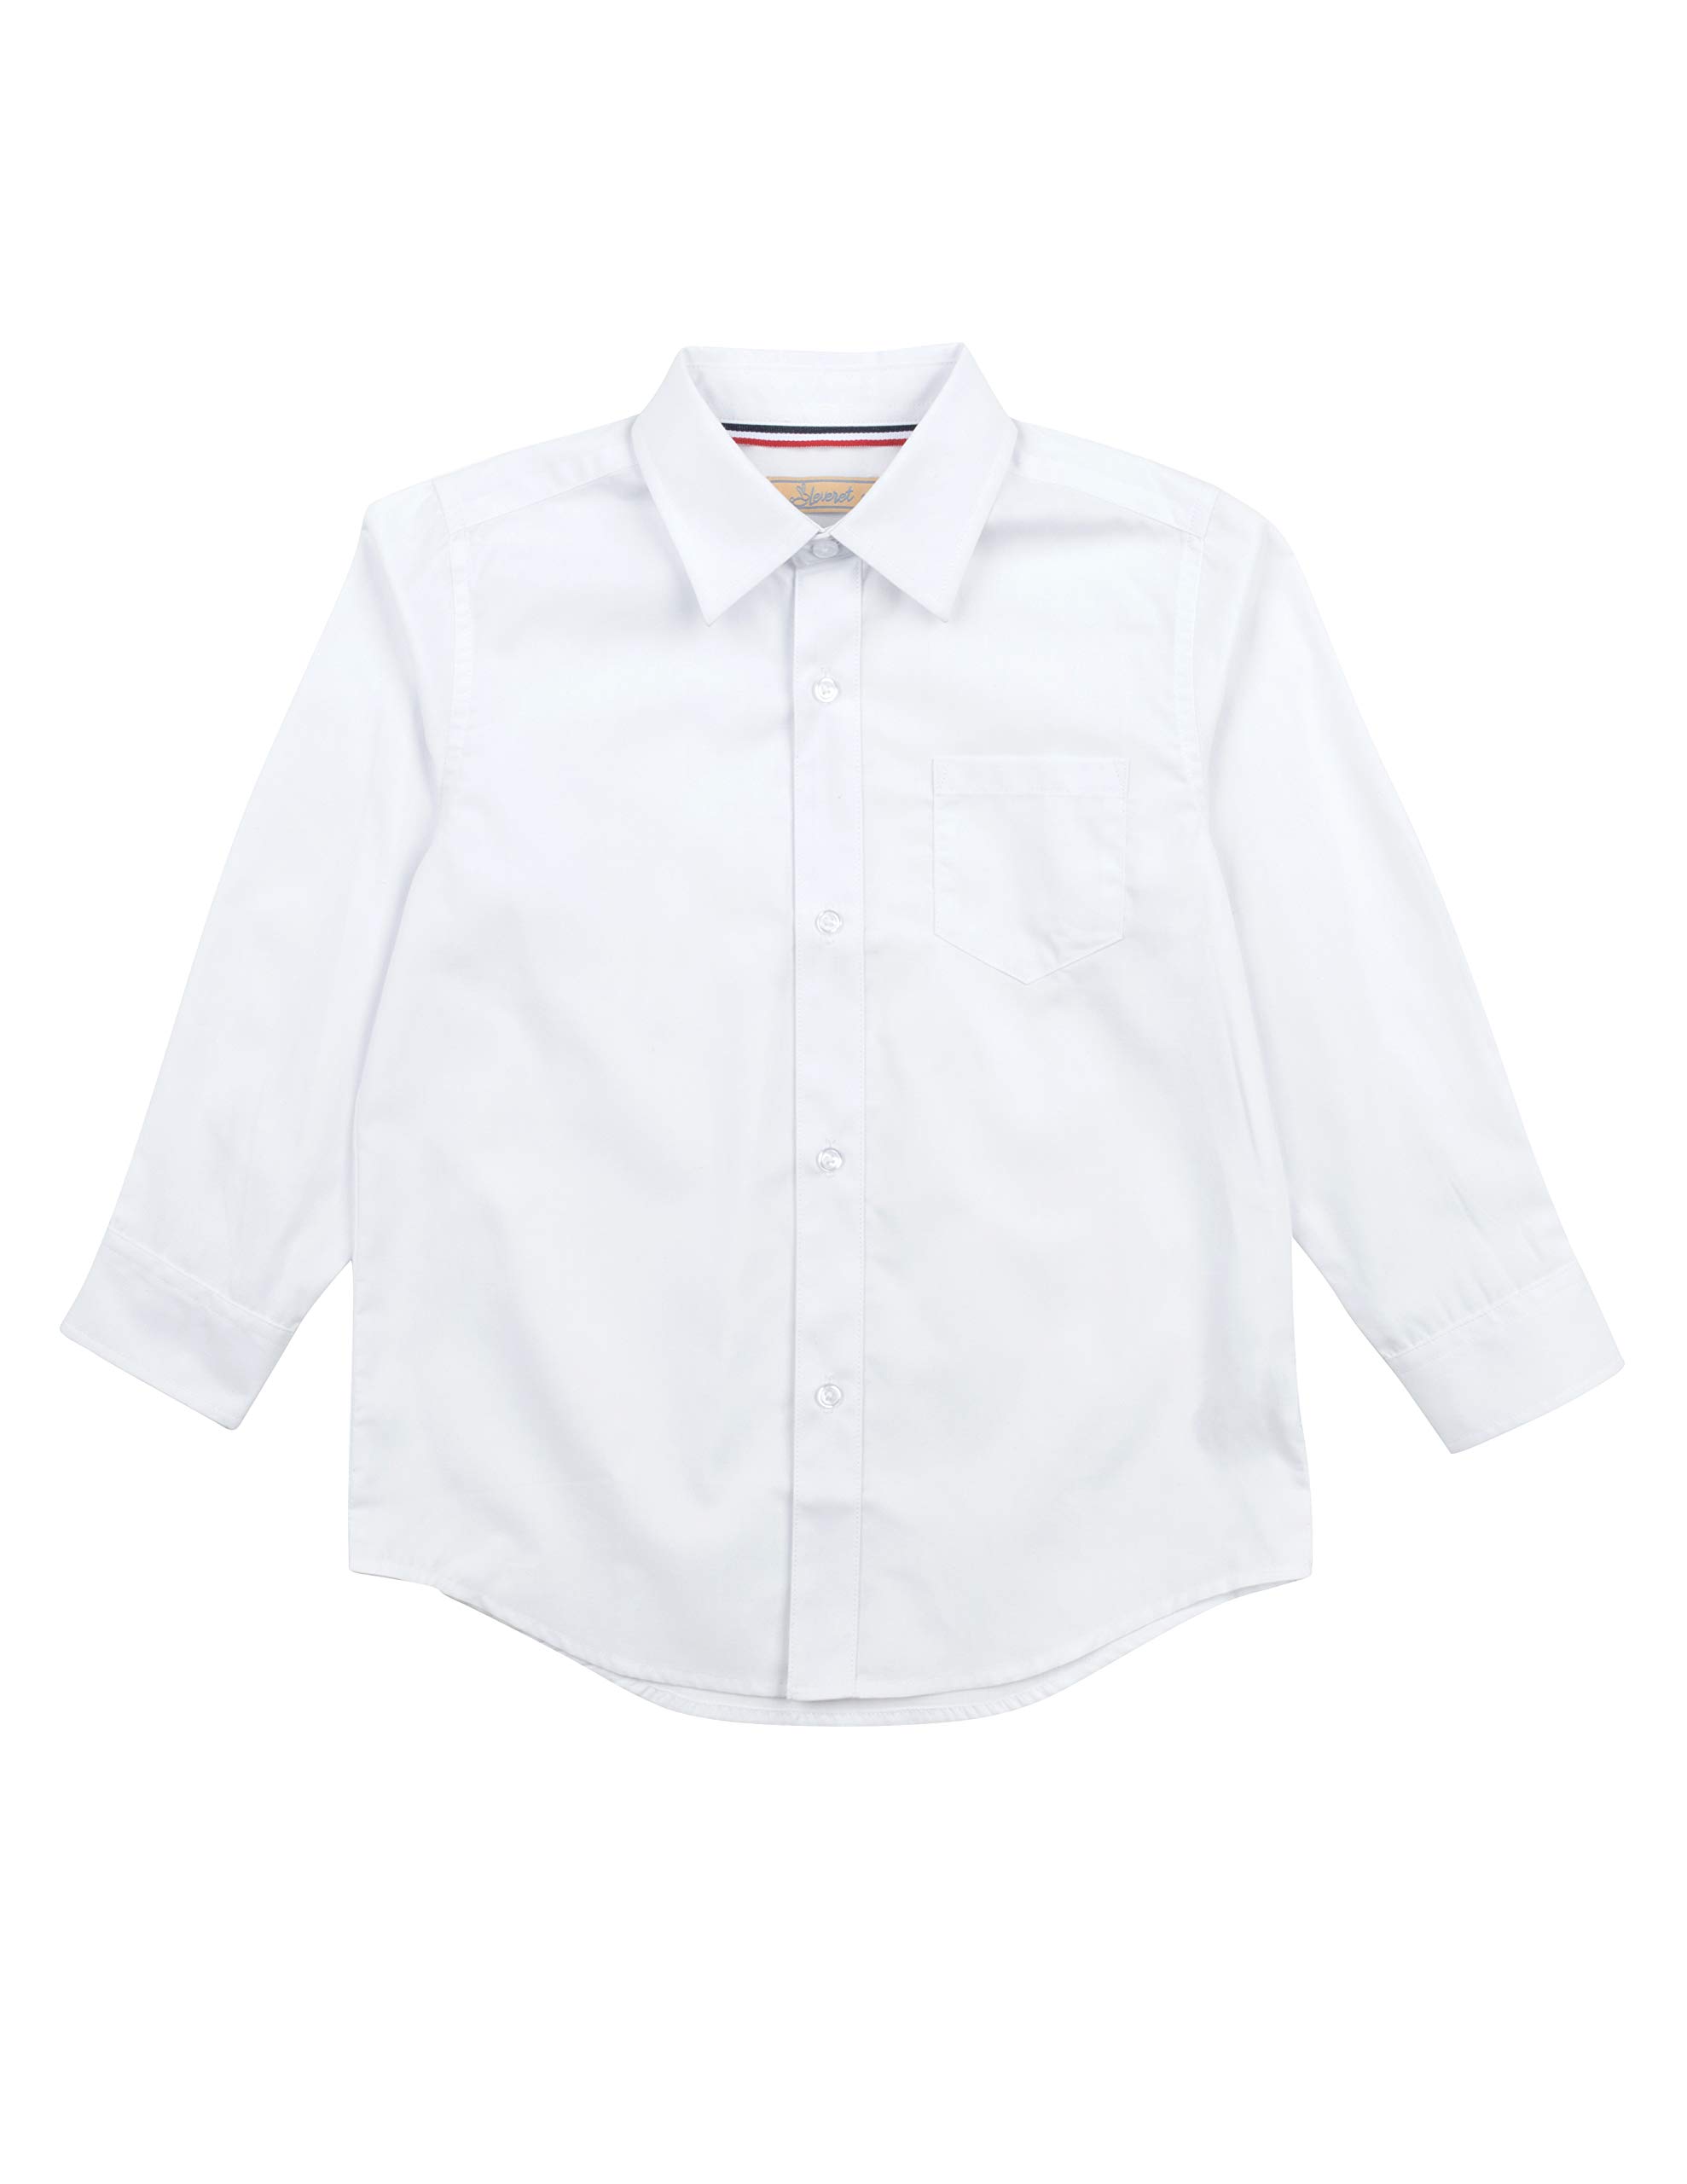 Leveret Kids & Toddler Boys Long Sleeve Uniform Cotton Dress Shirt Variety of Colors (Size 2-14 Years) (White, 3 Years) - image 1 of 3